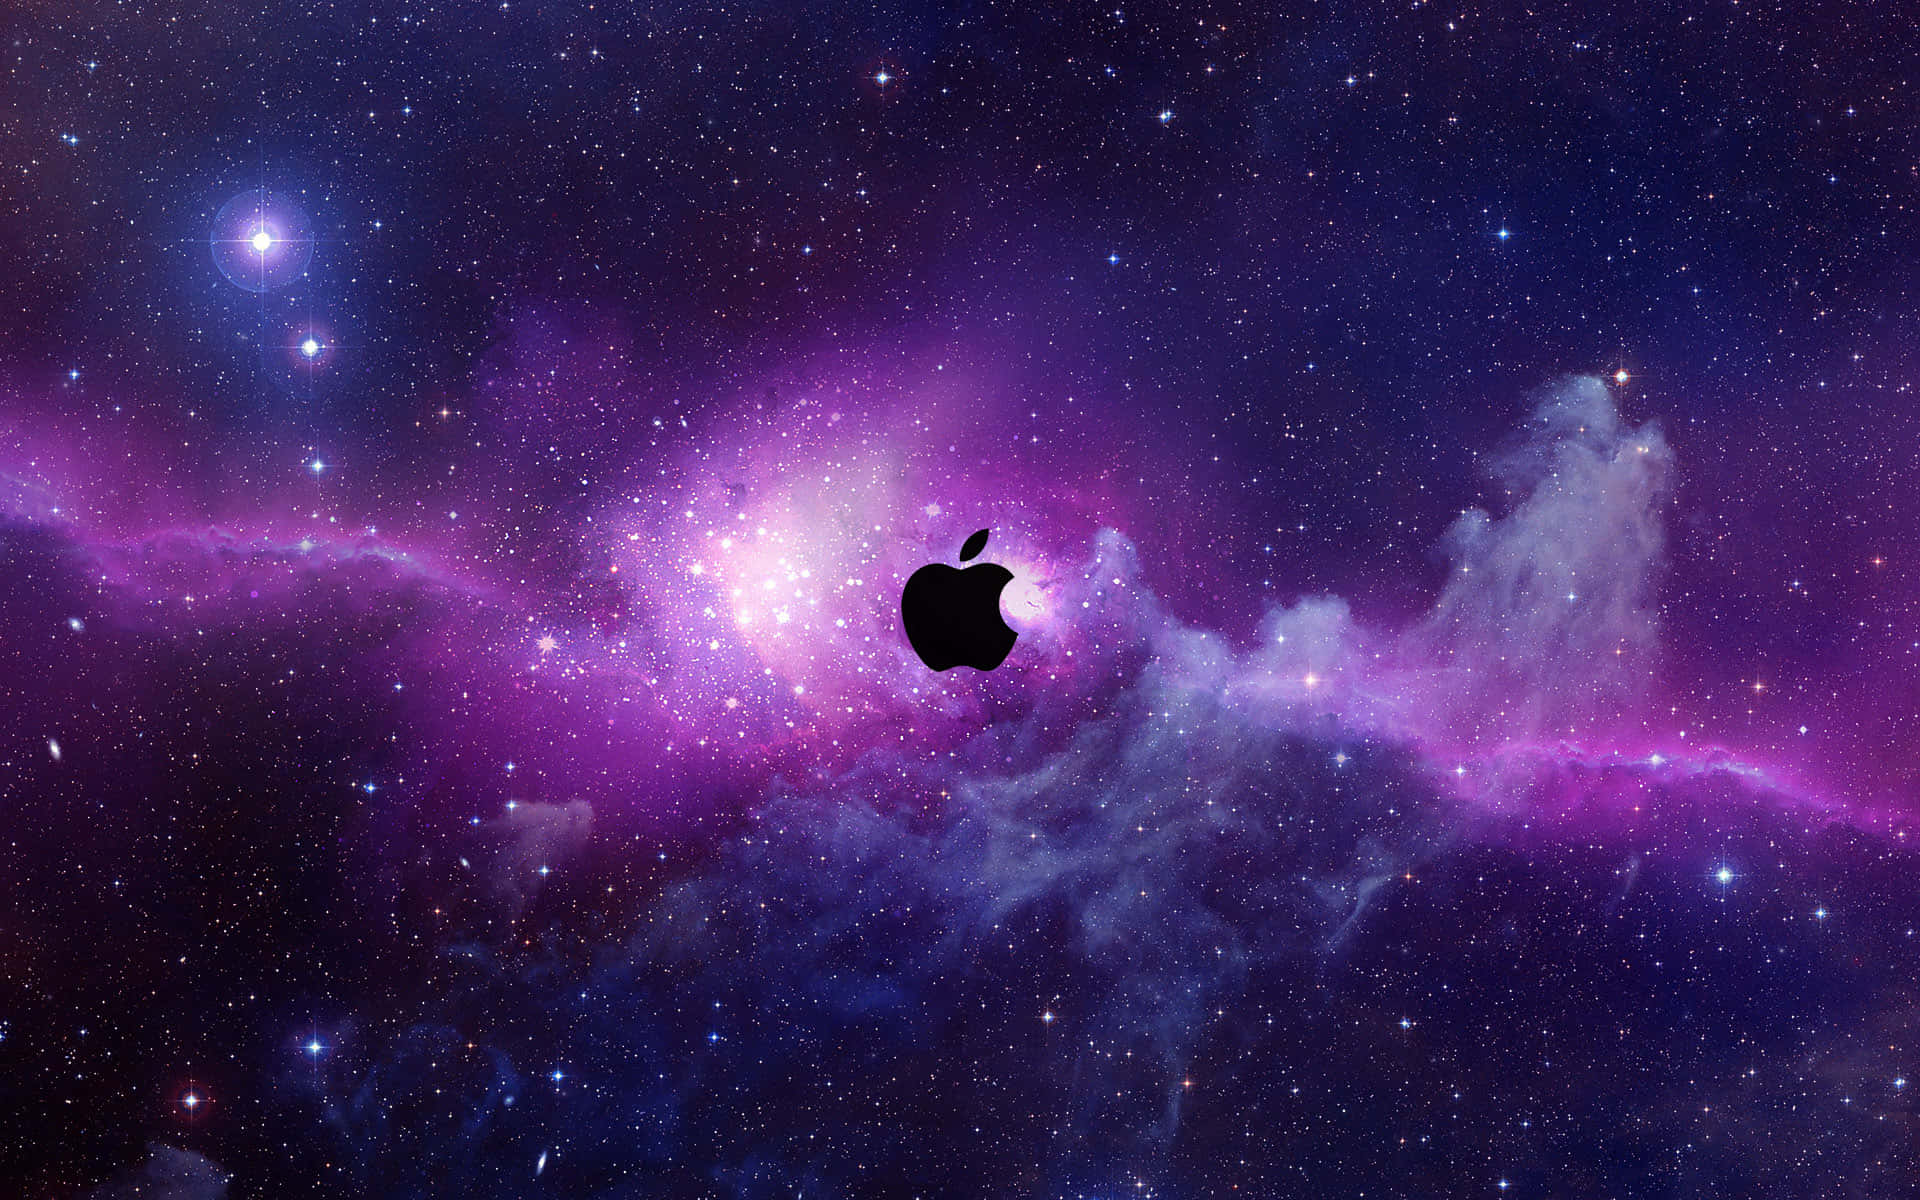 Cool Apple Background Wallpaper